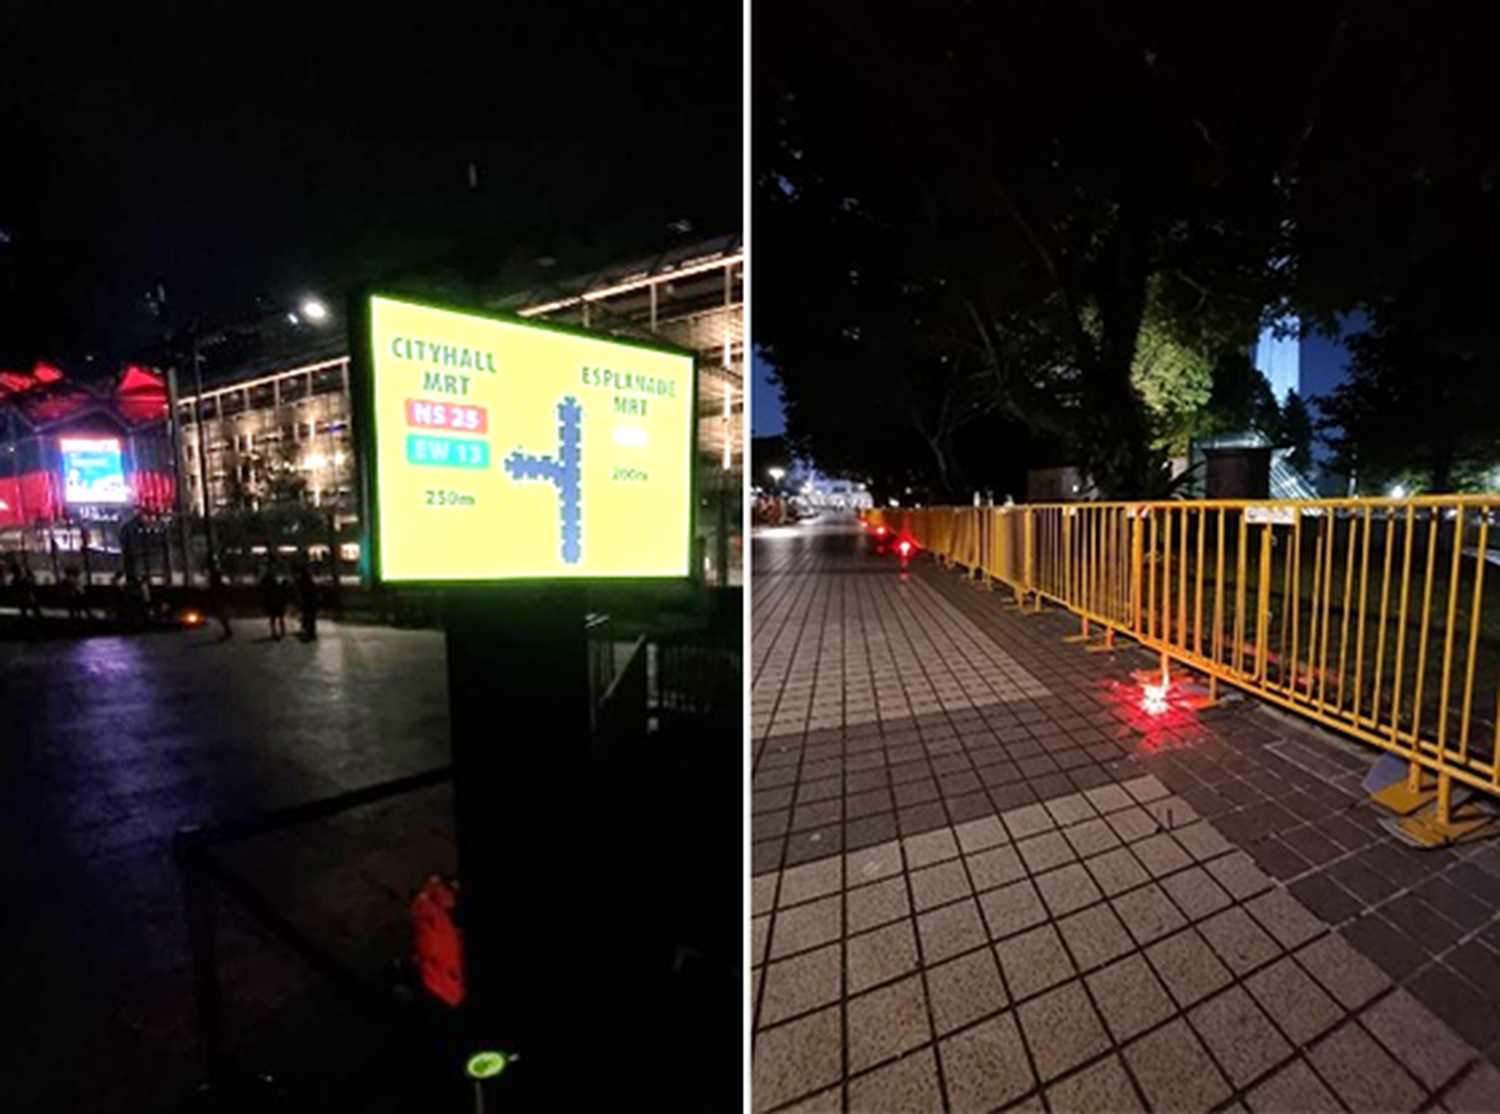 There are 2 side-by-side photos. The photo on the left is of an LED sign board in the dark which guides pedestrians and parade-goers to the NDP area with ease. The photo on the right is of red runway lights placed on the floor to guide pedestrians.